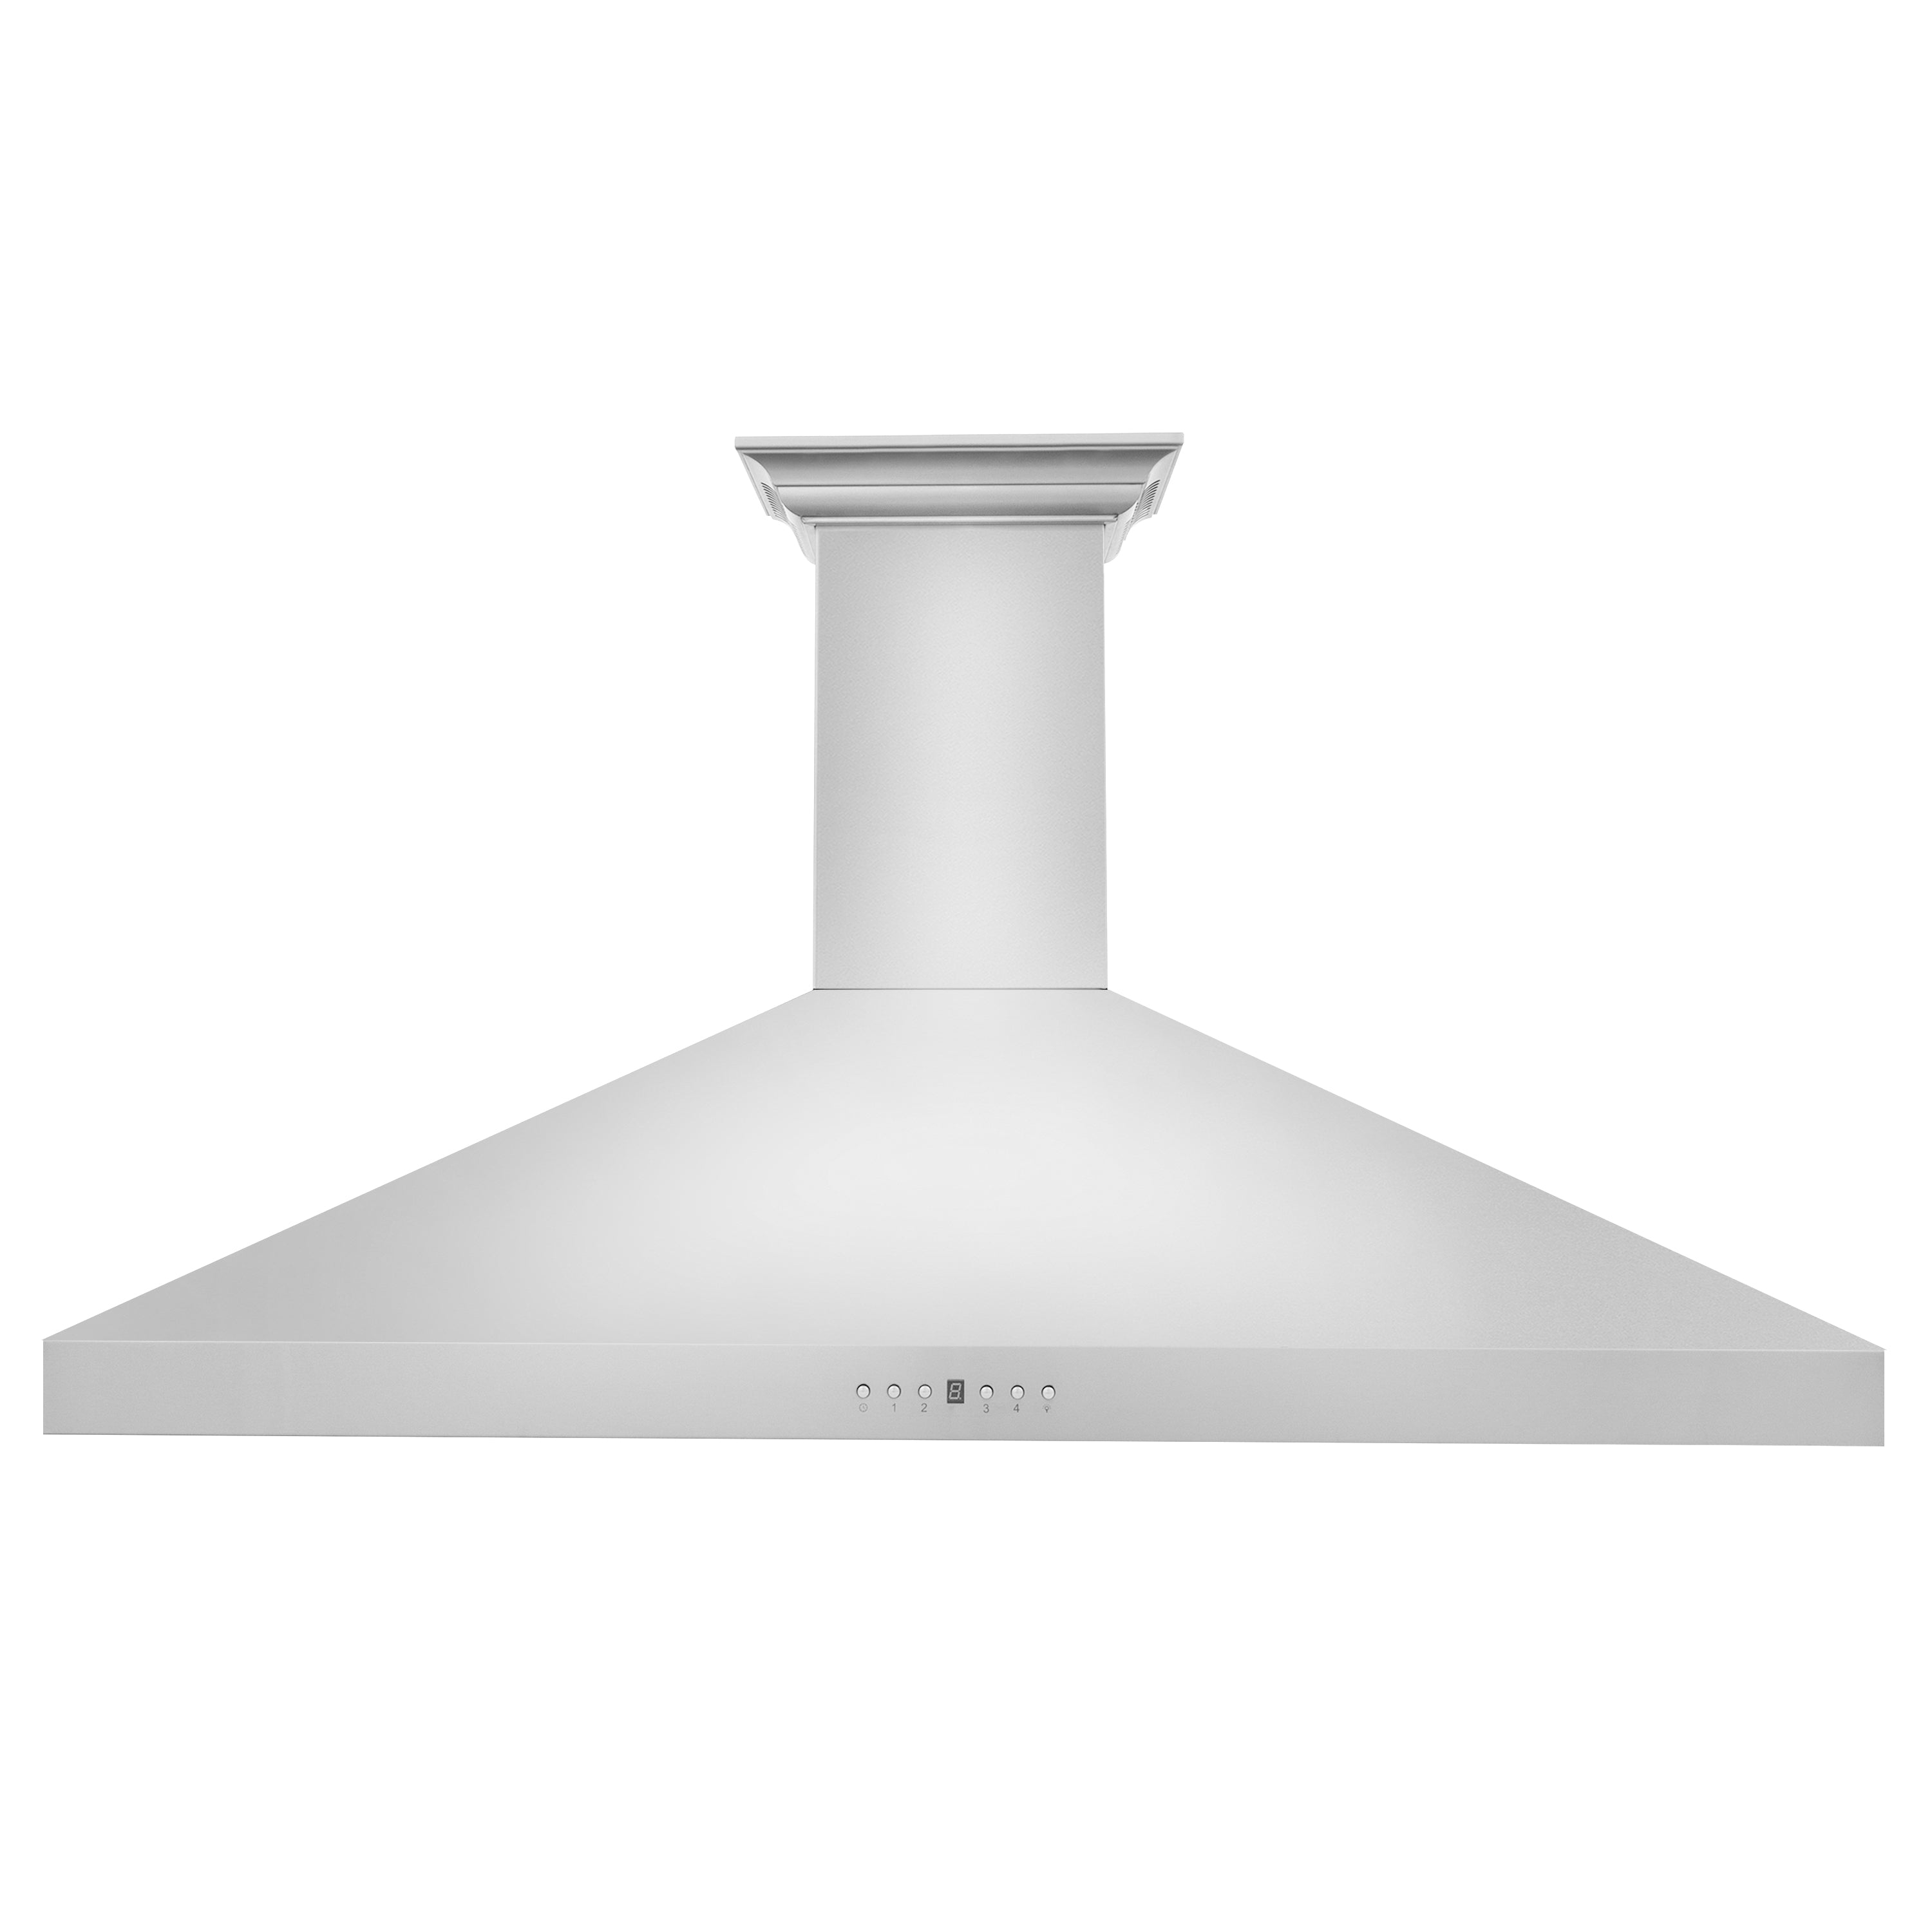 48" ZLINE CrownSound‚ Ducted Vent Wall Mount Range Hood in Stainless Steel with Built-in Bluetooth Speakers (KL3CRN-BT-48)